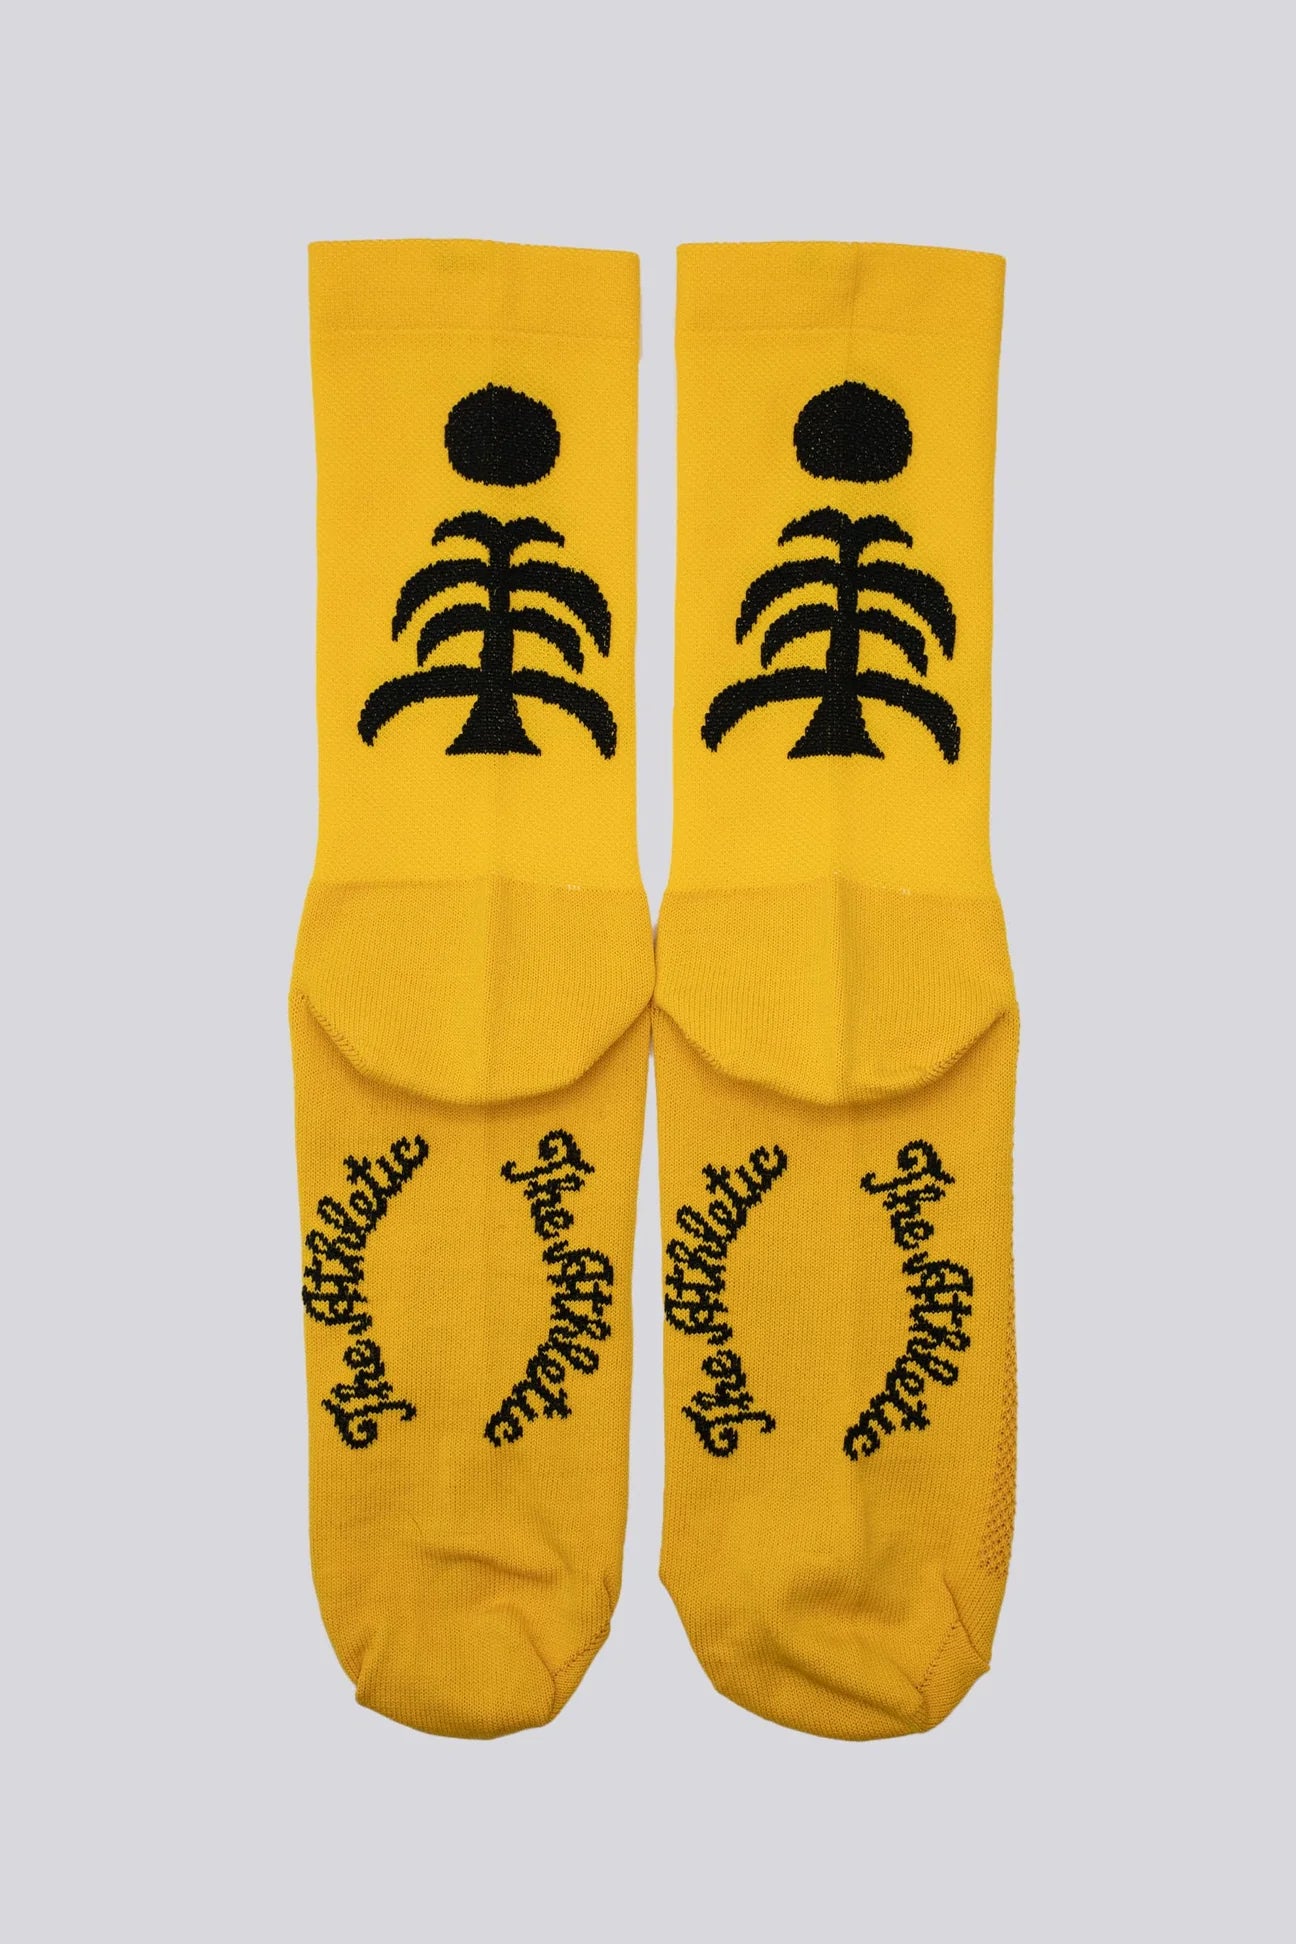 THE ATHLETIC COMMUNITY Death Palm Cycling Socks - Light Gold